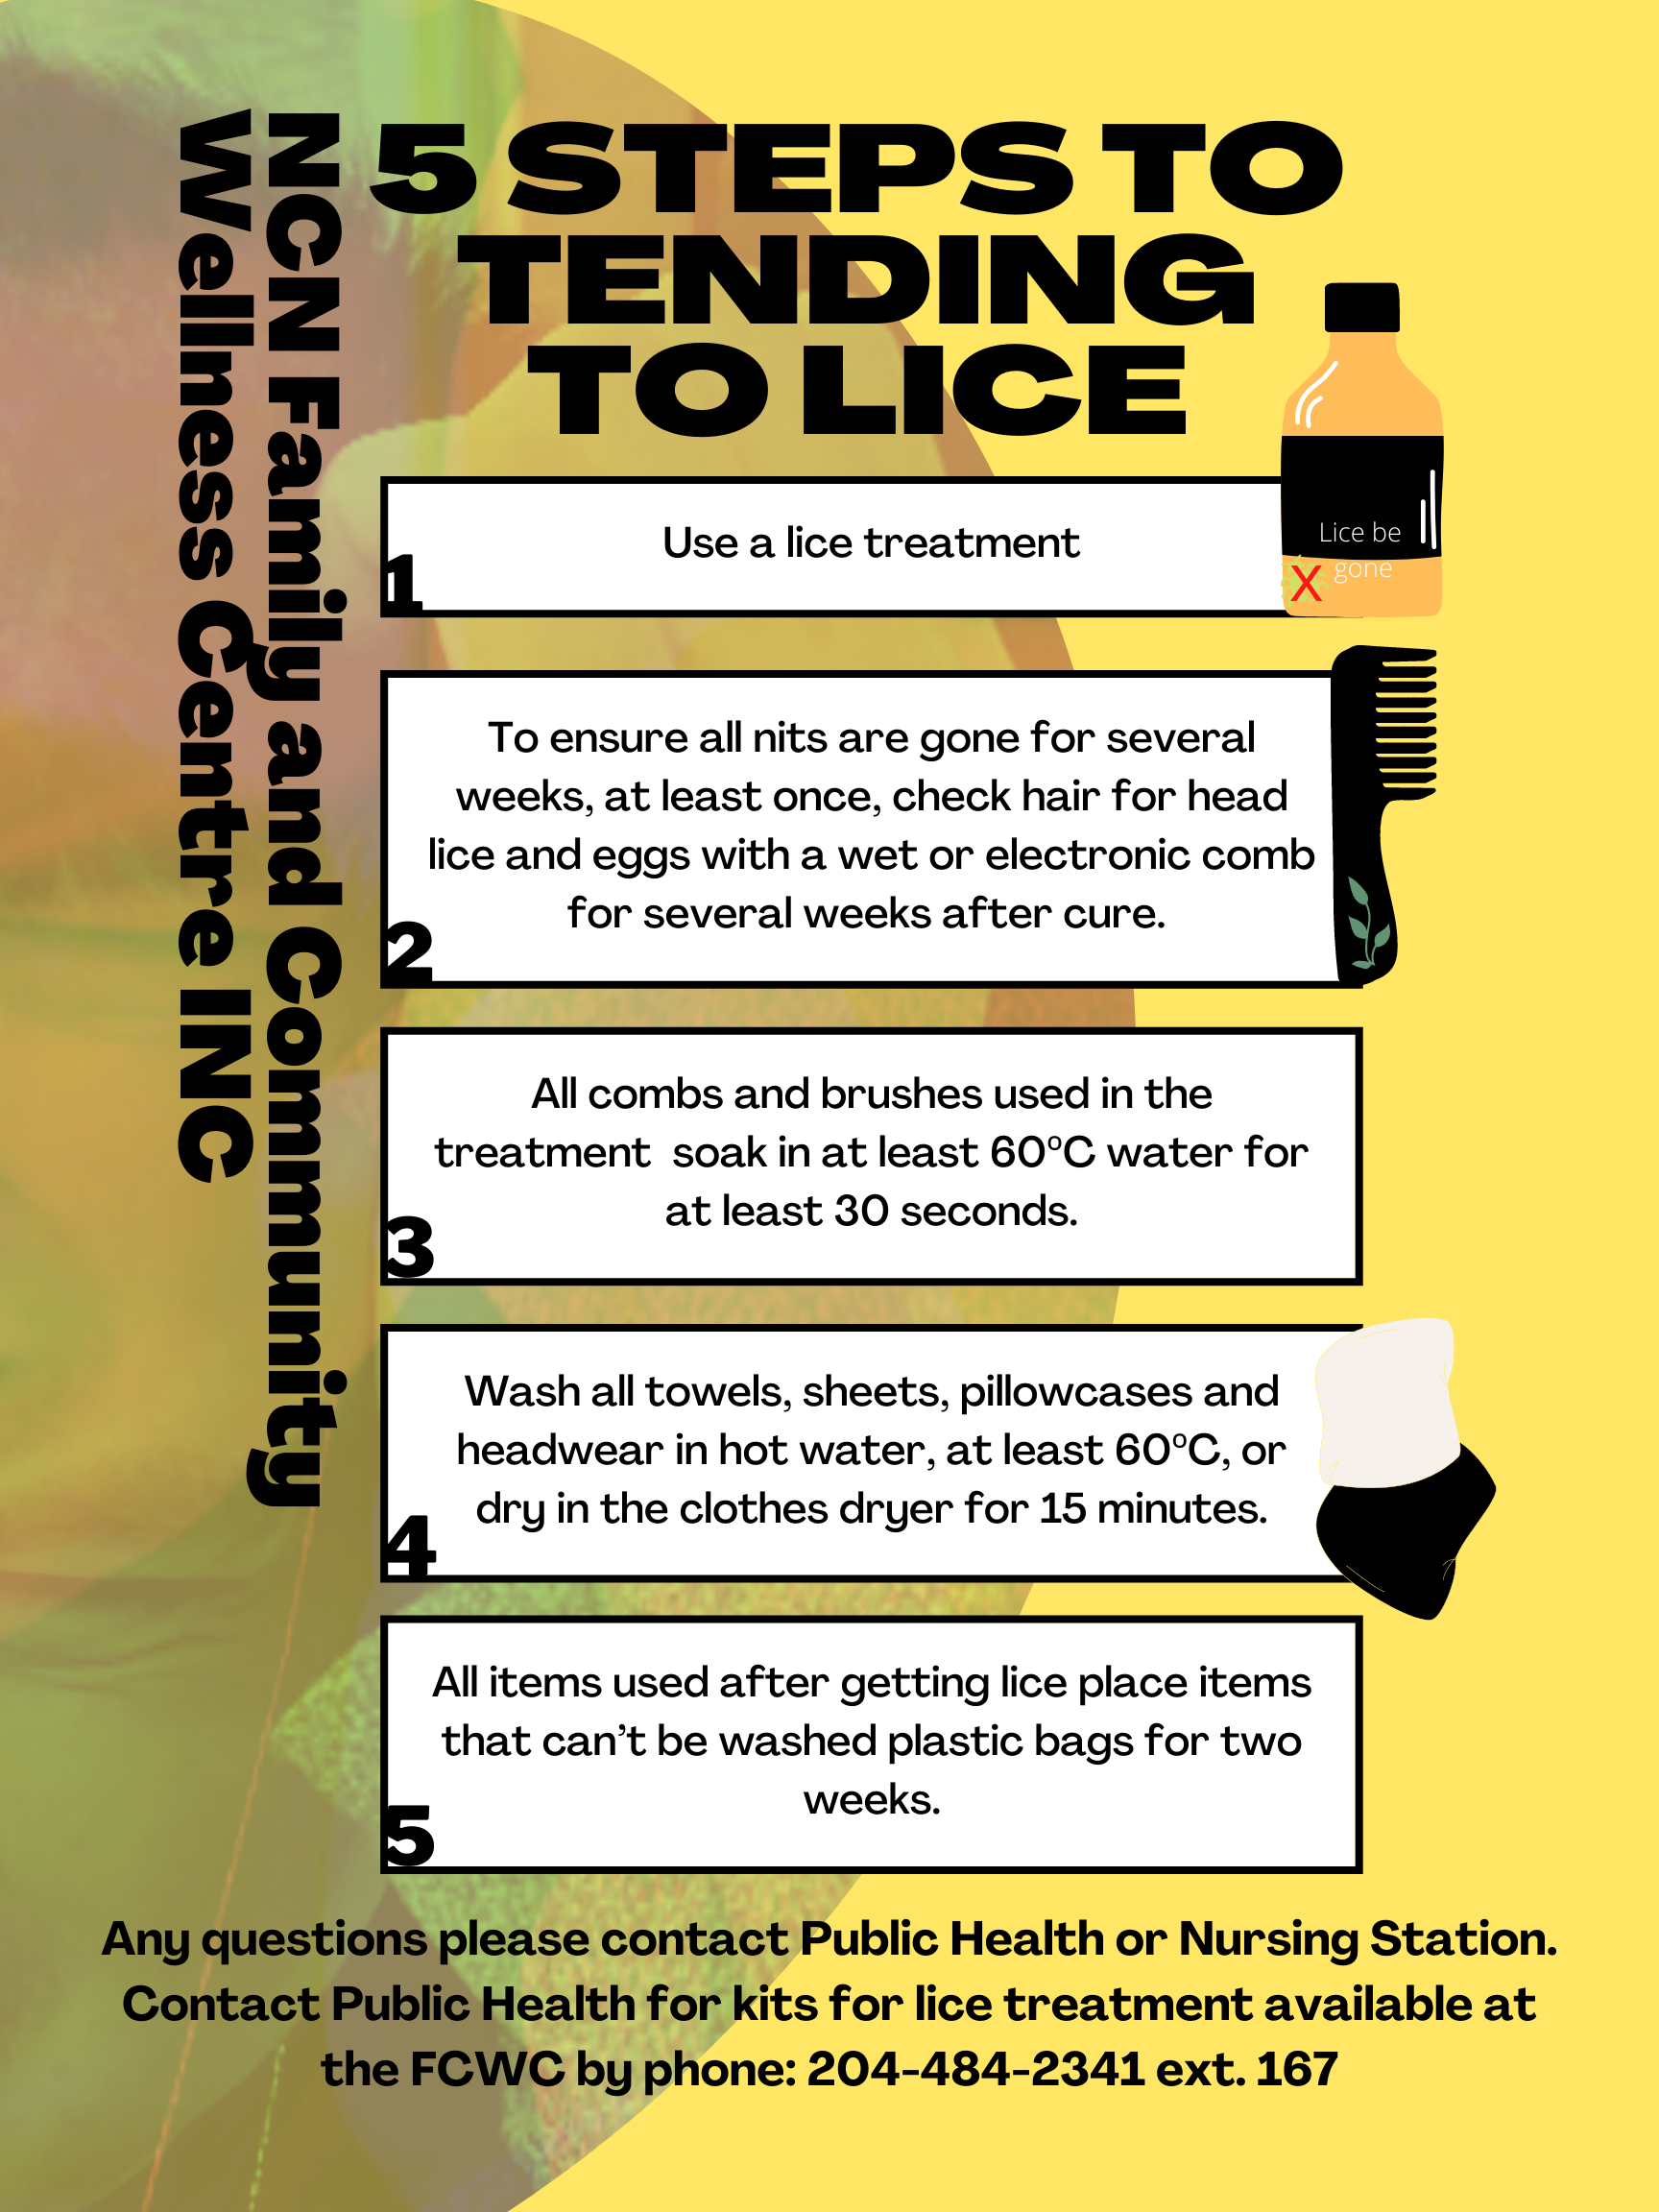 5 Steps to Tending to Lice